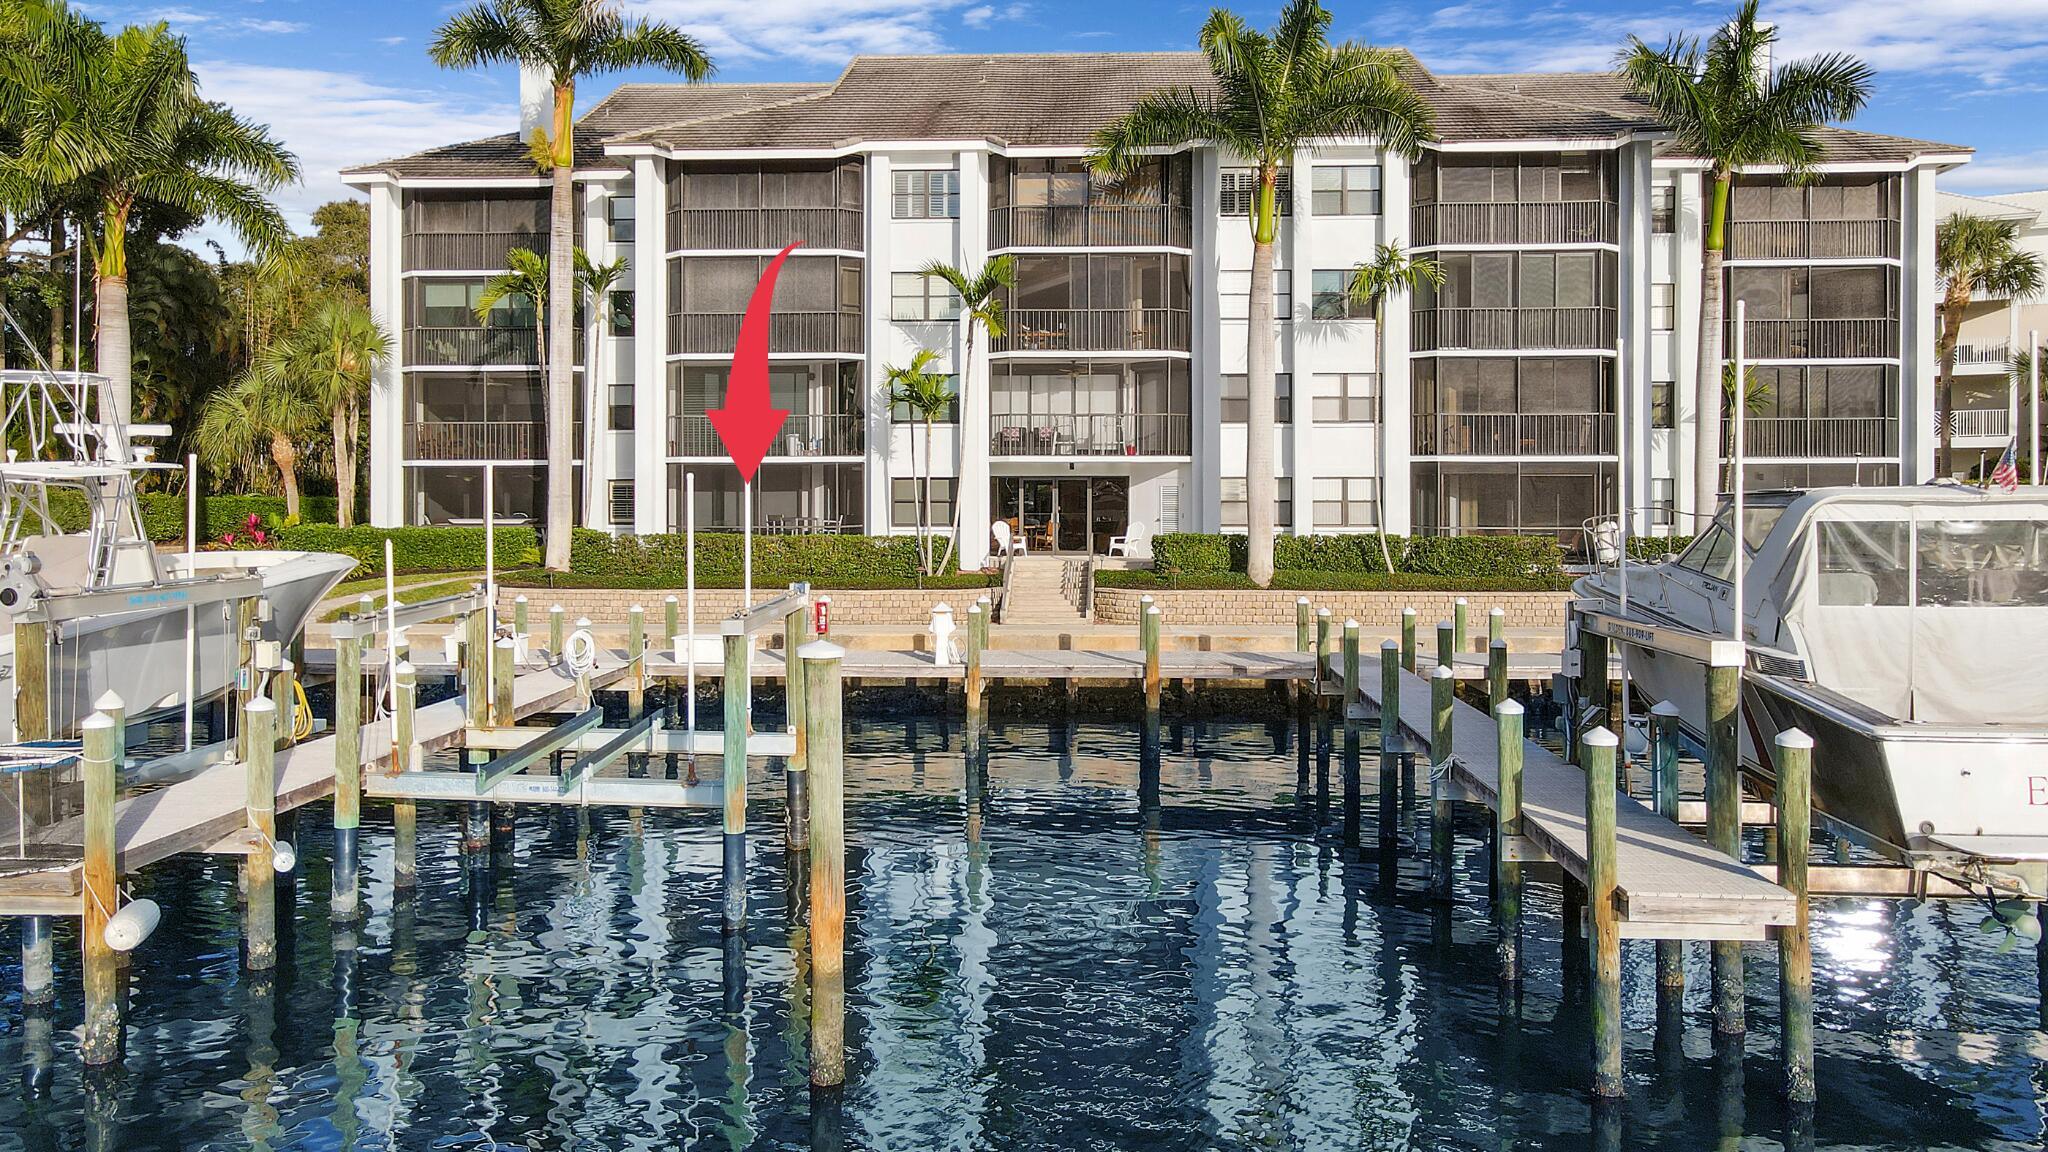 A Boat Owners Dream!! Gorgeous completely remodeled & fully furnished condo located directly on the intracoastal in Bay Colony with a 42ft deeded boat slip & 24,000 lb. boat lift! The unit boasts direct marina & intracoastal views with private front & back entrances to the condo. If you're looking for a move-in-ready contemporary designed condo with a boat slip, this property is for you!  It's an all-in-one package that will fit up to a 44ft. boat & provides incredible sunset views from nearly every room! Bay Colony has 2 private marinas, a resort style pool, hot tub, fitness center, clubhouse, tennis courts, etc.All of this is just a bonus on top of the central location, being minutes to Juno Beach, restaurants & shopping!